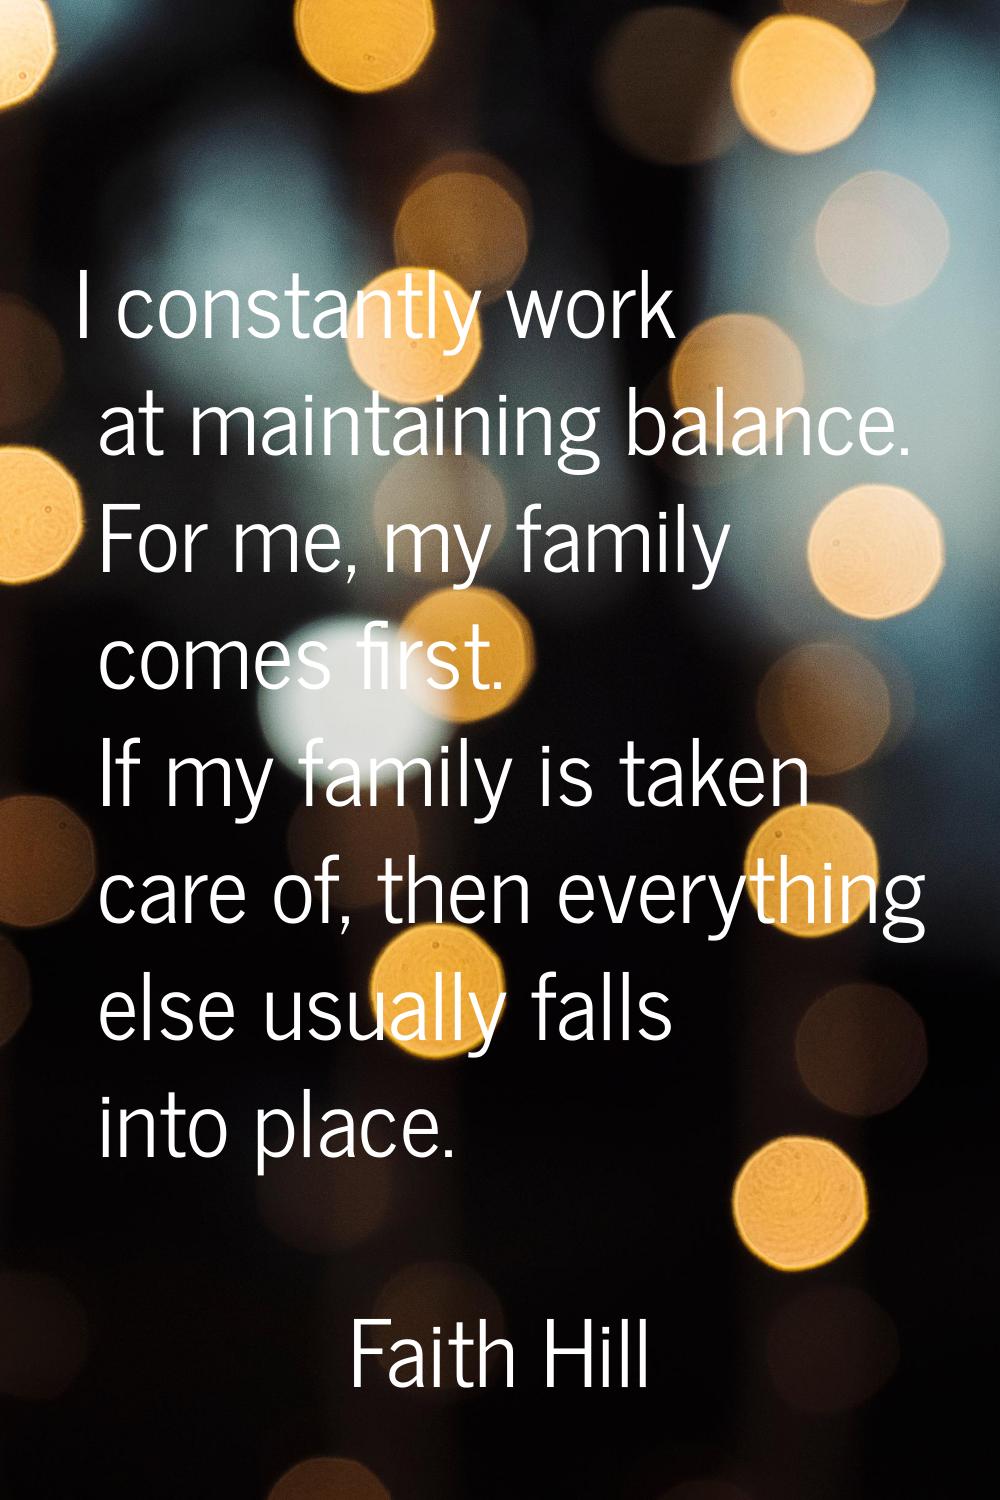 I constantly work at maintaining balance. For me, my family comes first. If my family is taken care